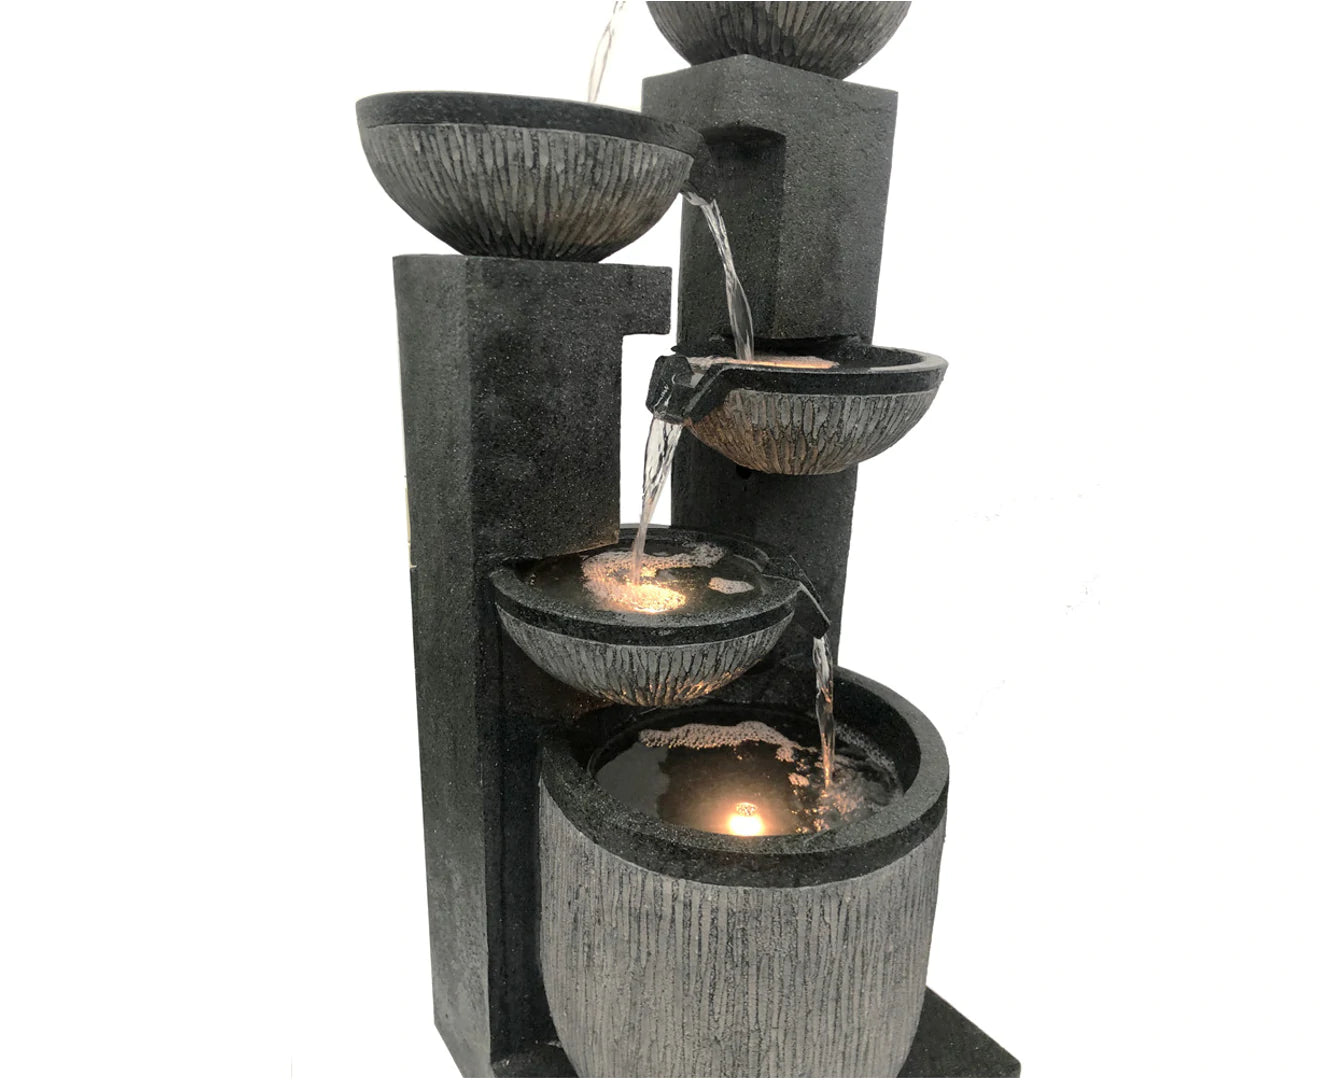 Swale - Cascading Lighting 5 Bowl Waterfall Water Feature